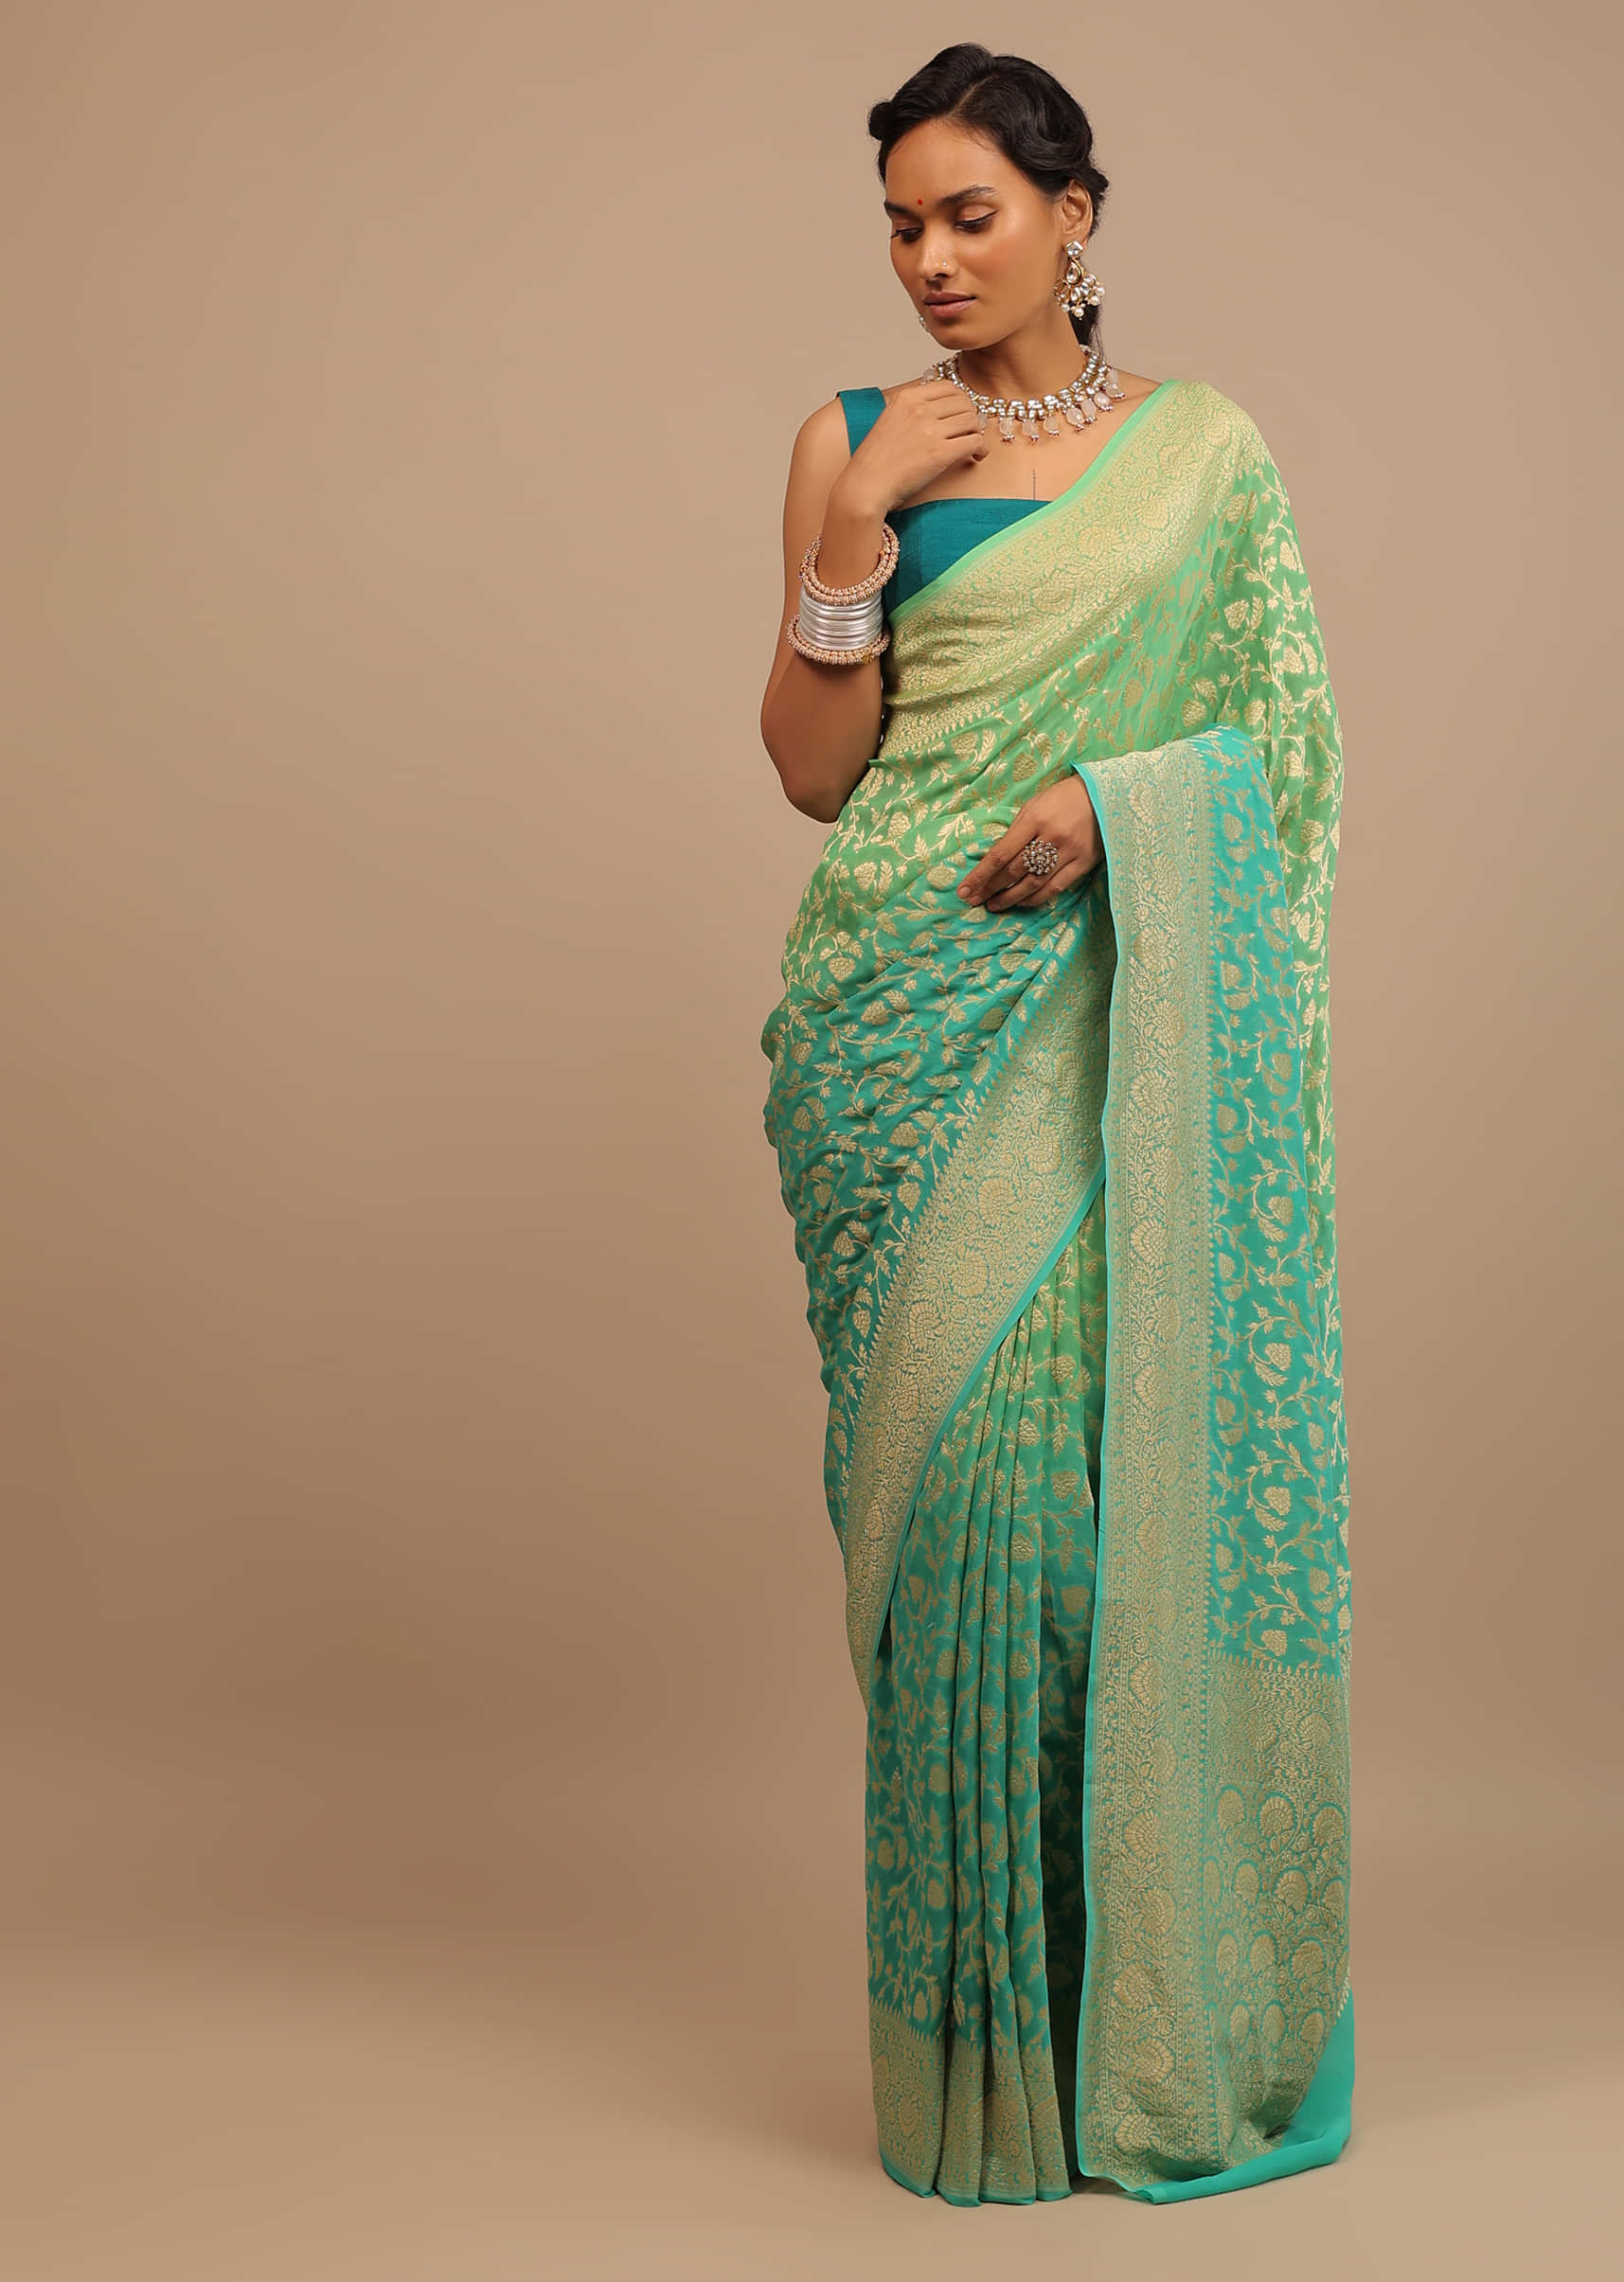 Jade Green Saree Made In Georgette And Beautified With Golden Jaal In A Floral Pattern